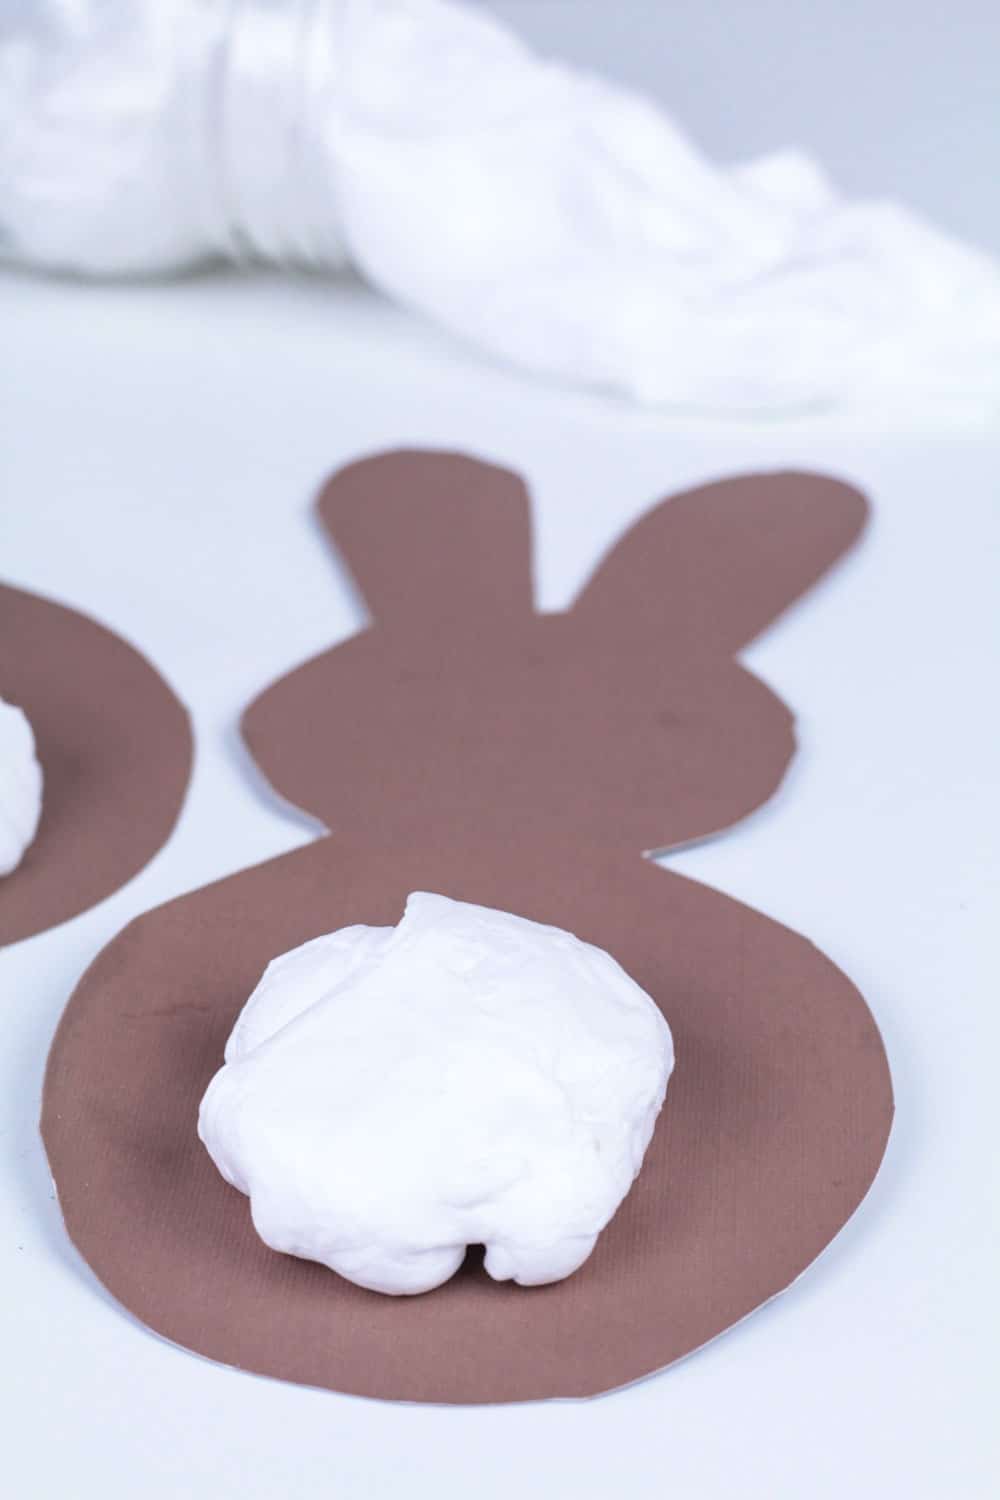 Calling all slime fans! This fluffy bunny tail slime recipe is the perfect slime recipe for Easter! The Easter slime is super fluffy and looks just like a bunny tail! Use the printable bunny template to make this slime activity even easier!